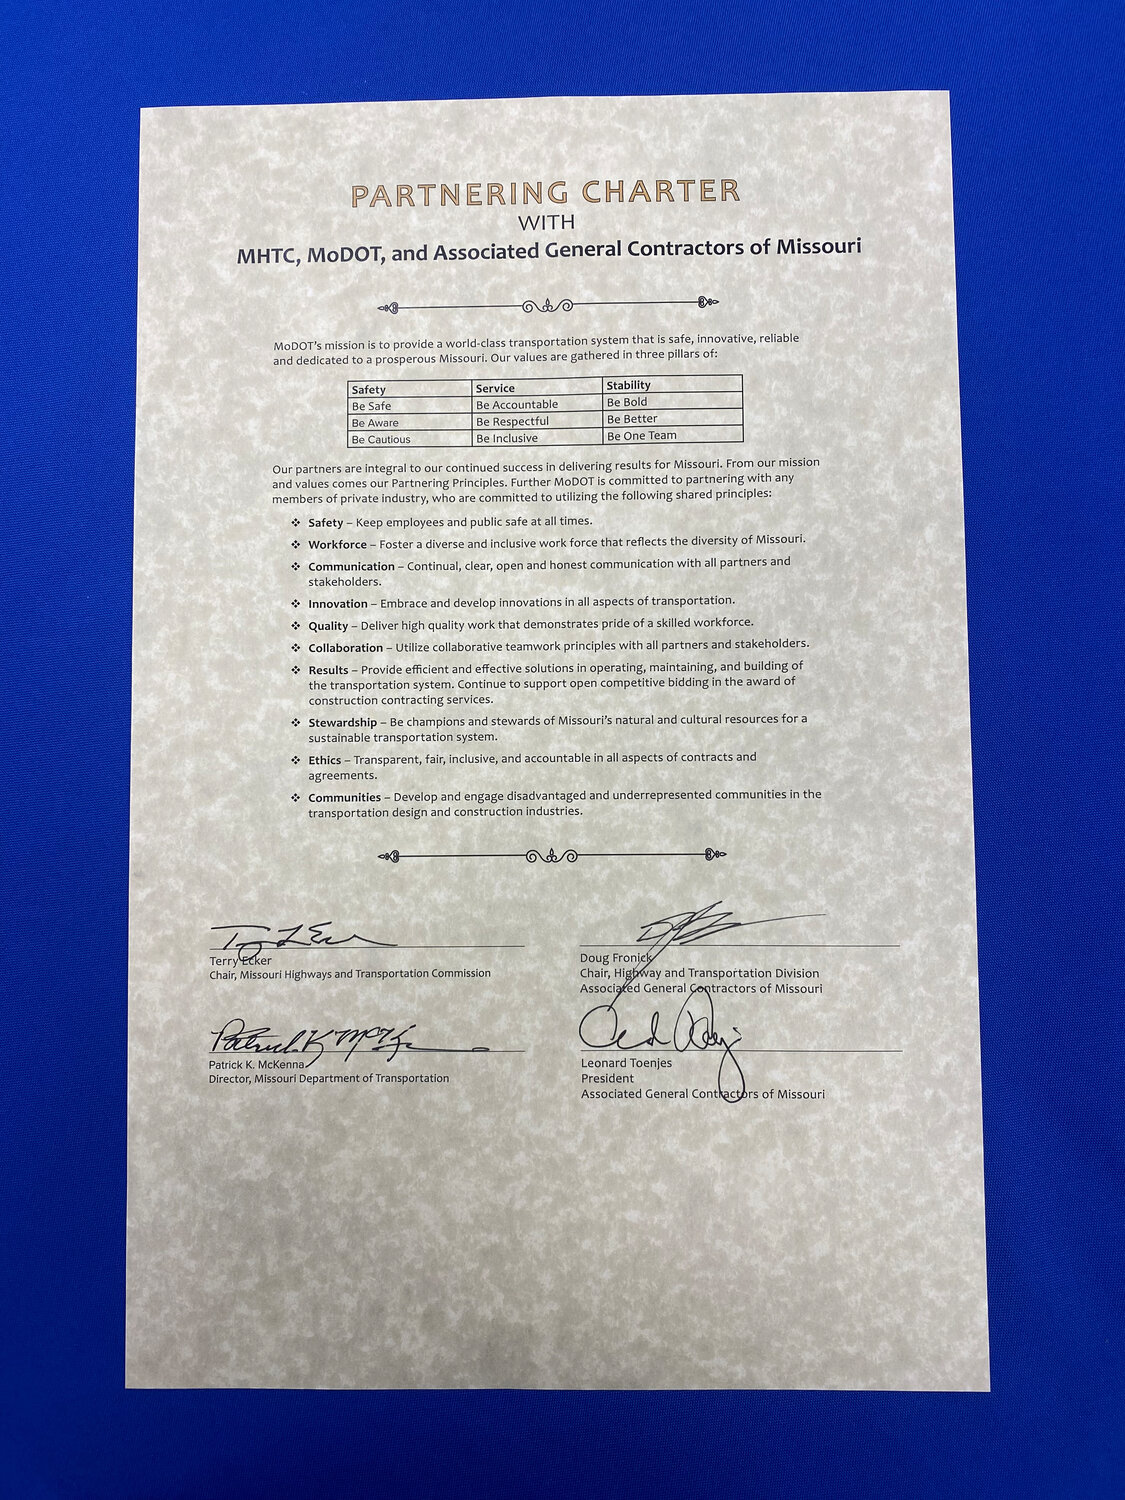 The partnering charter updates an agreement from 1992.